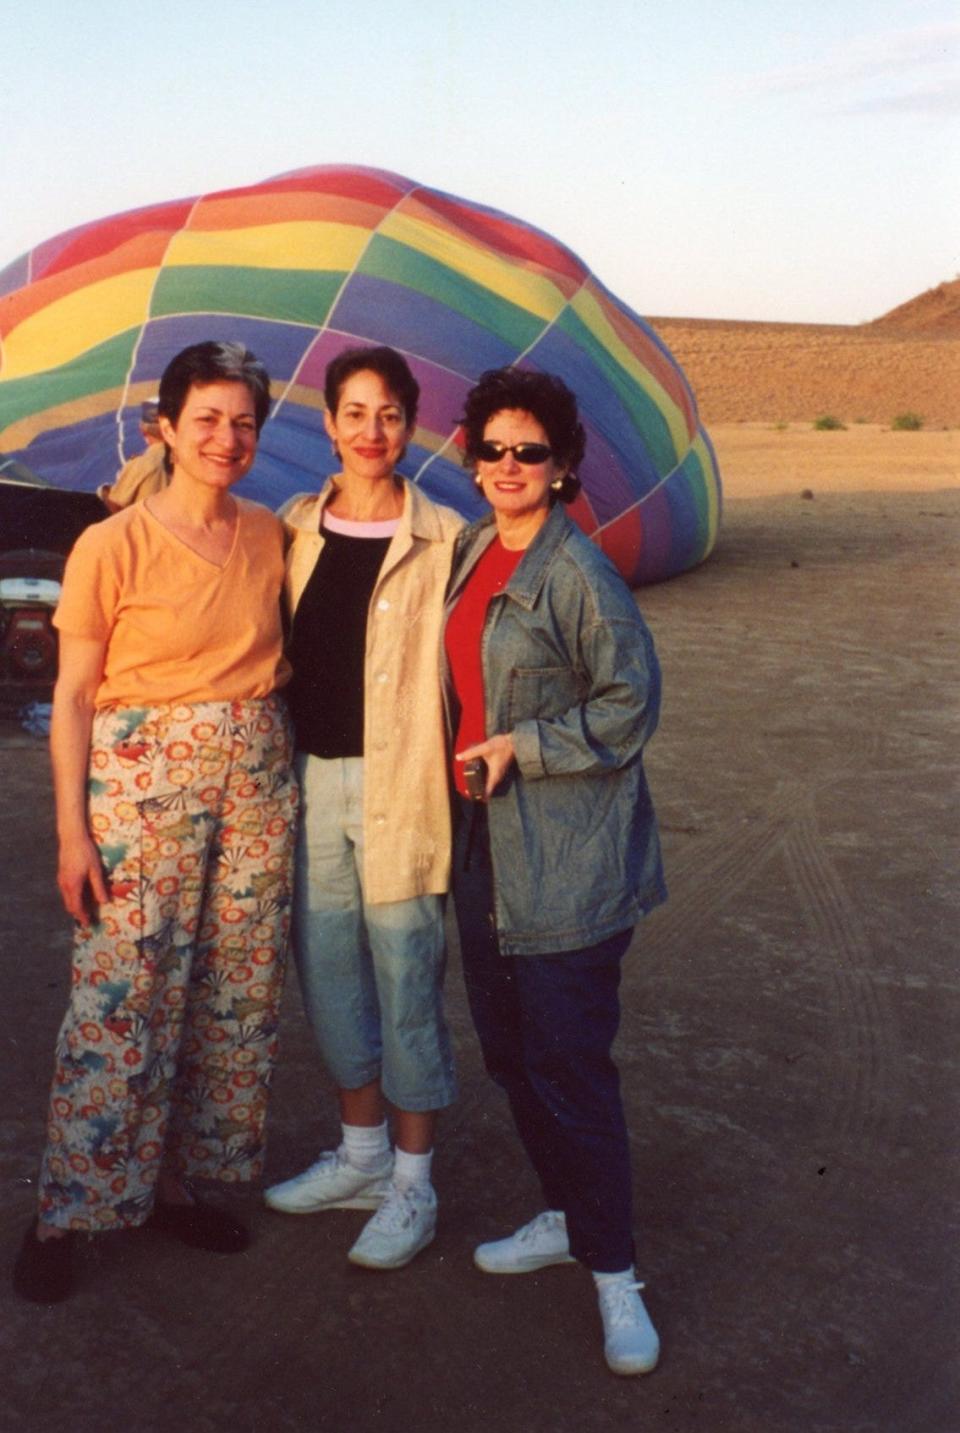 The author (middle) with her two sisters before going on a hot air balloon ride in 2002.